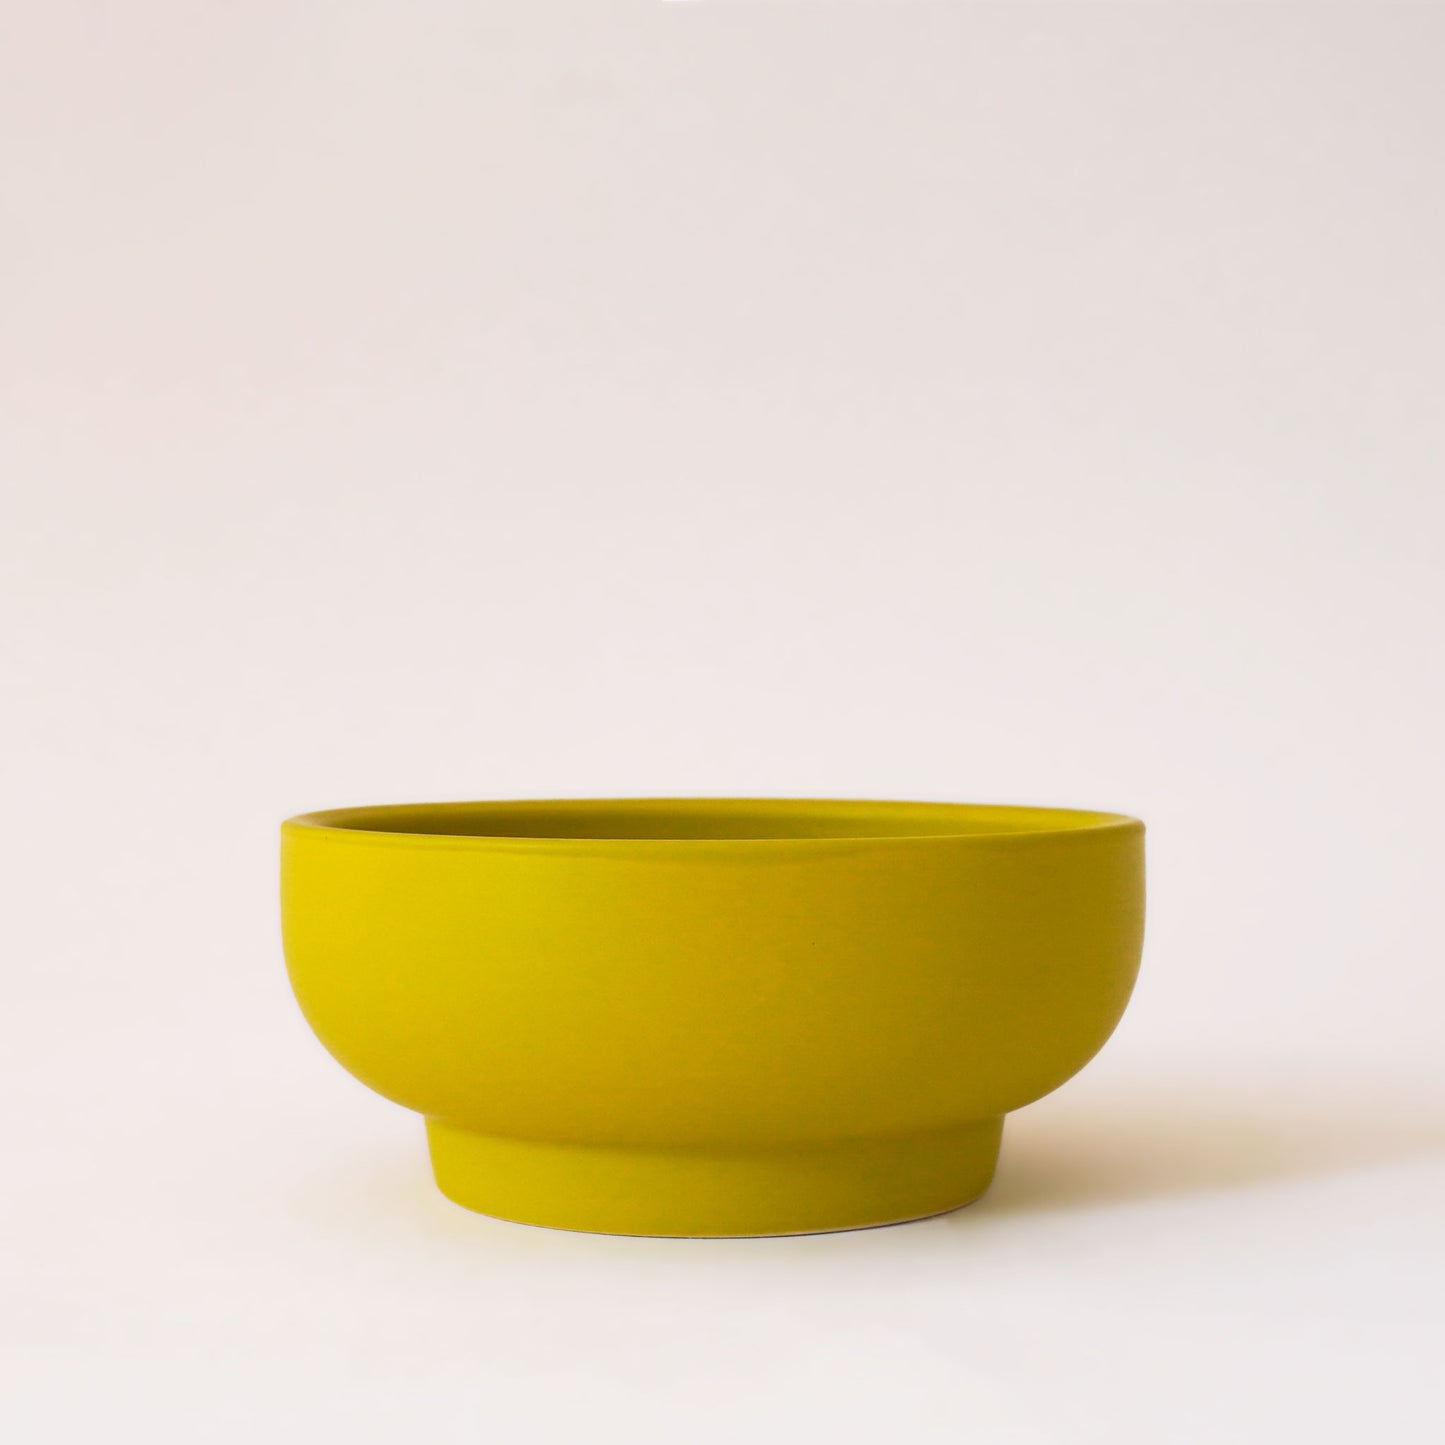 Chartreuse orange bowl planter that tapers towards the base.